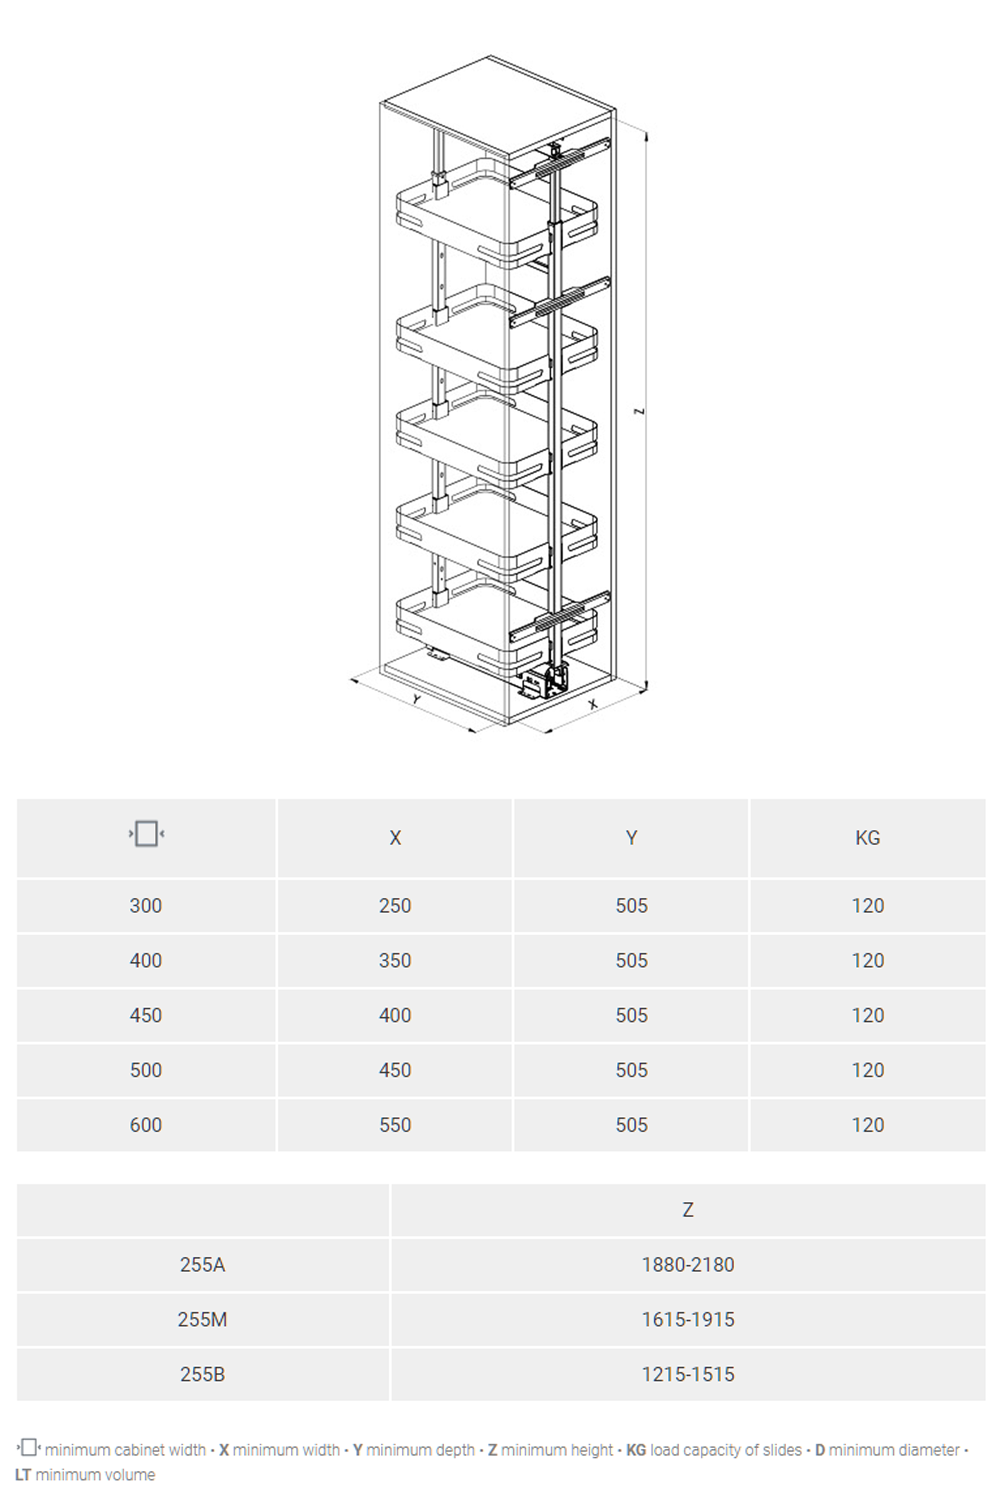 SIGE 253M MATERIA tall pull-out basket / larder 高柜拉籃 | Made in Italy |